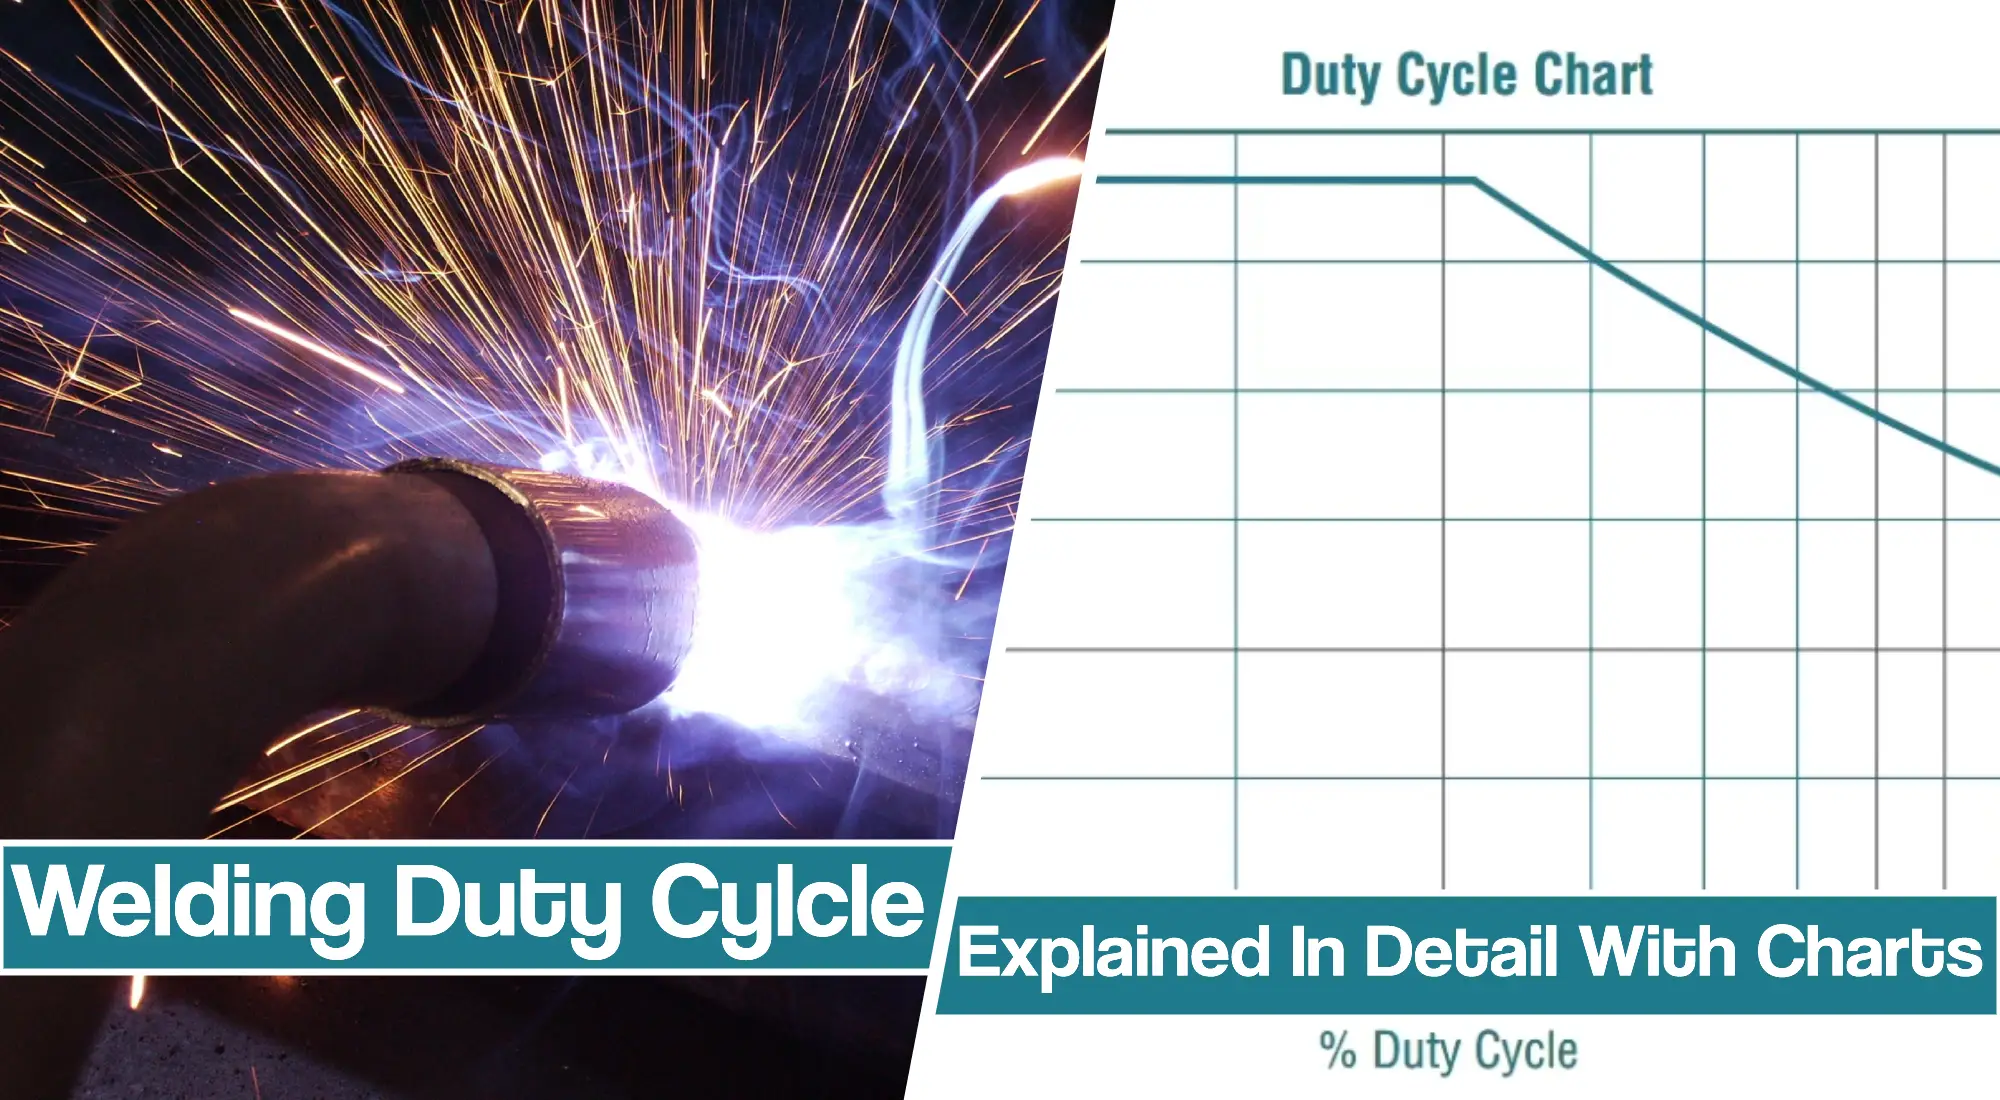 What is Duty Cycle in Welding & How to Calculate it?